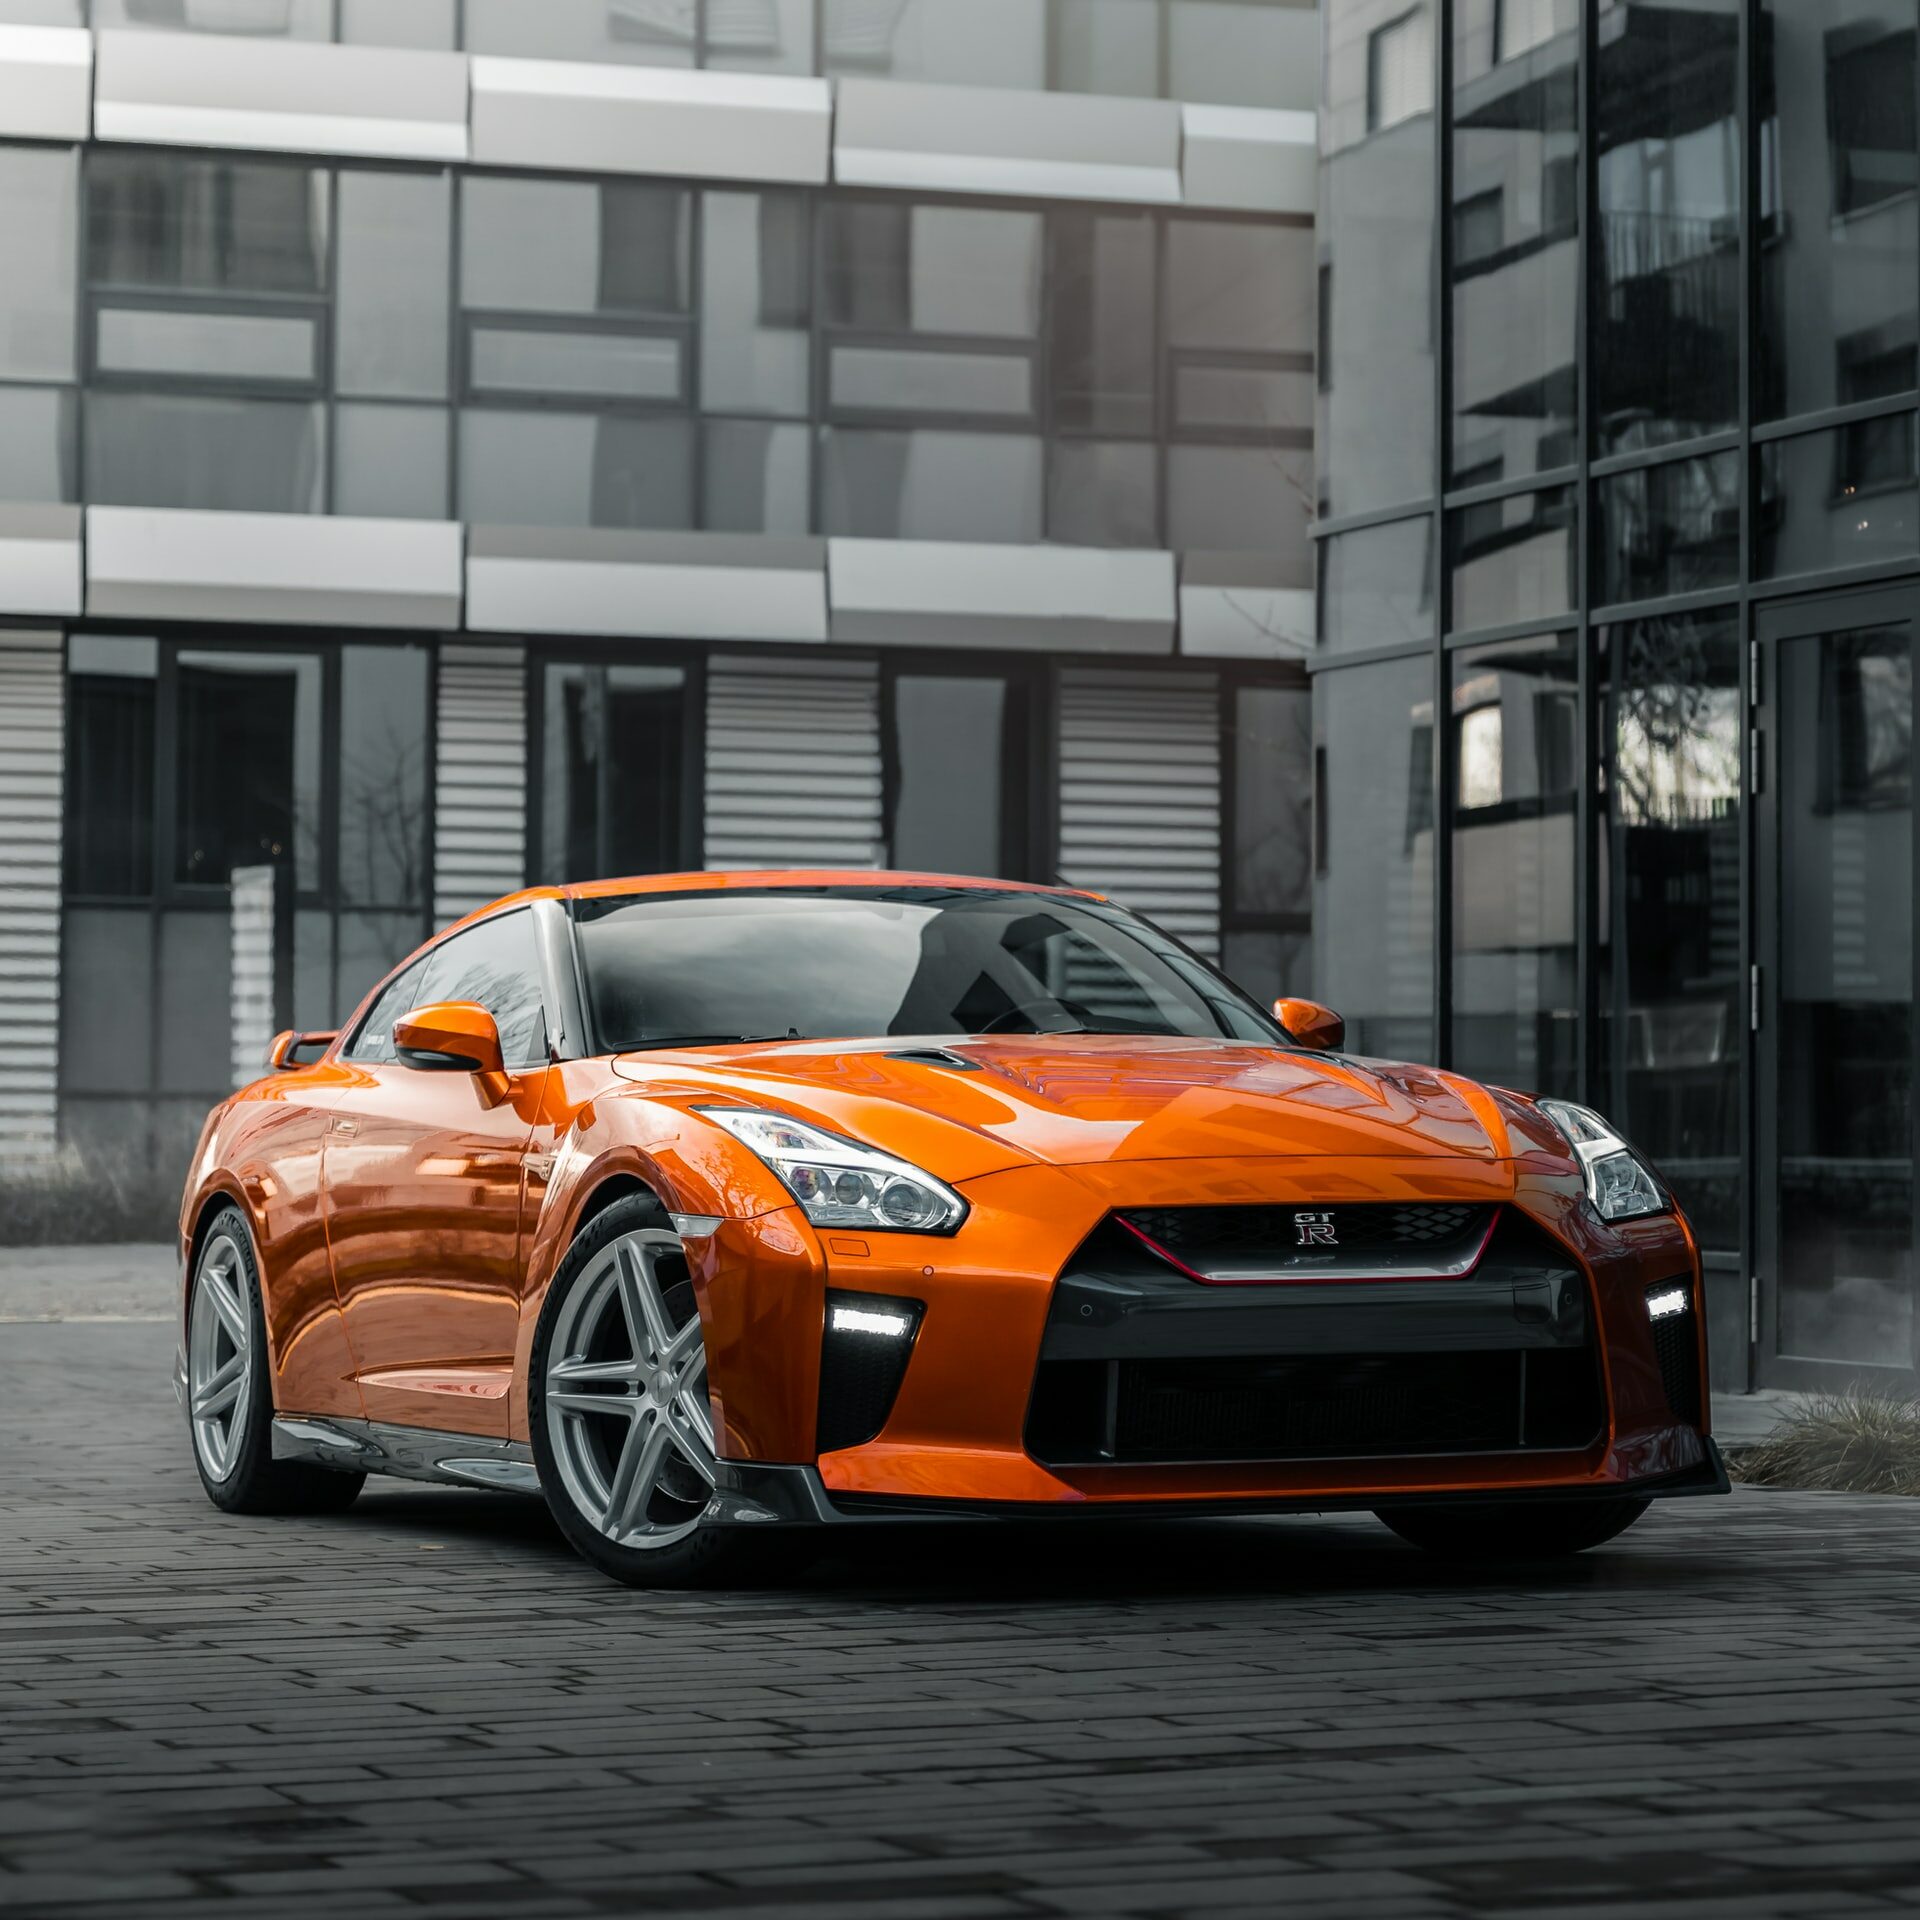 Most-Reliable-Supercars-Nissan-GT-R